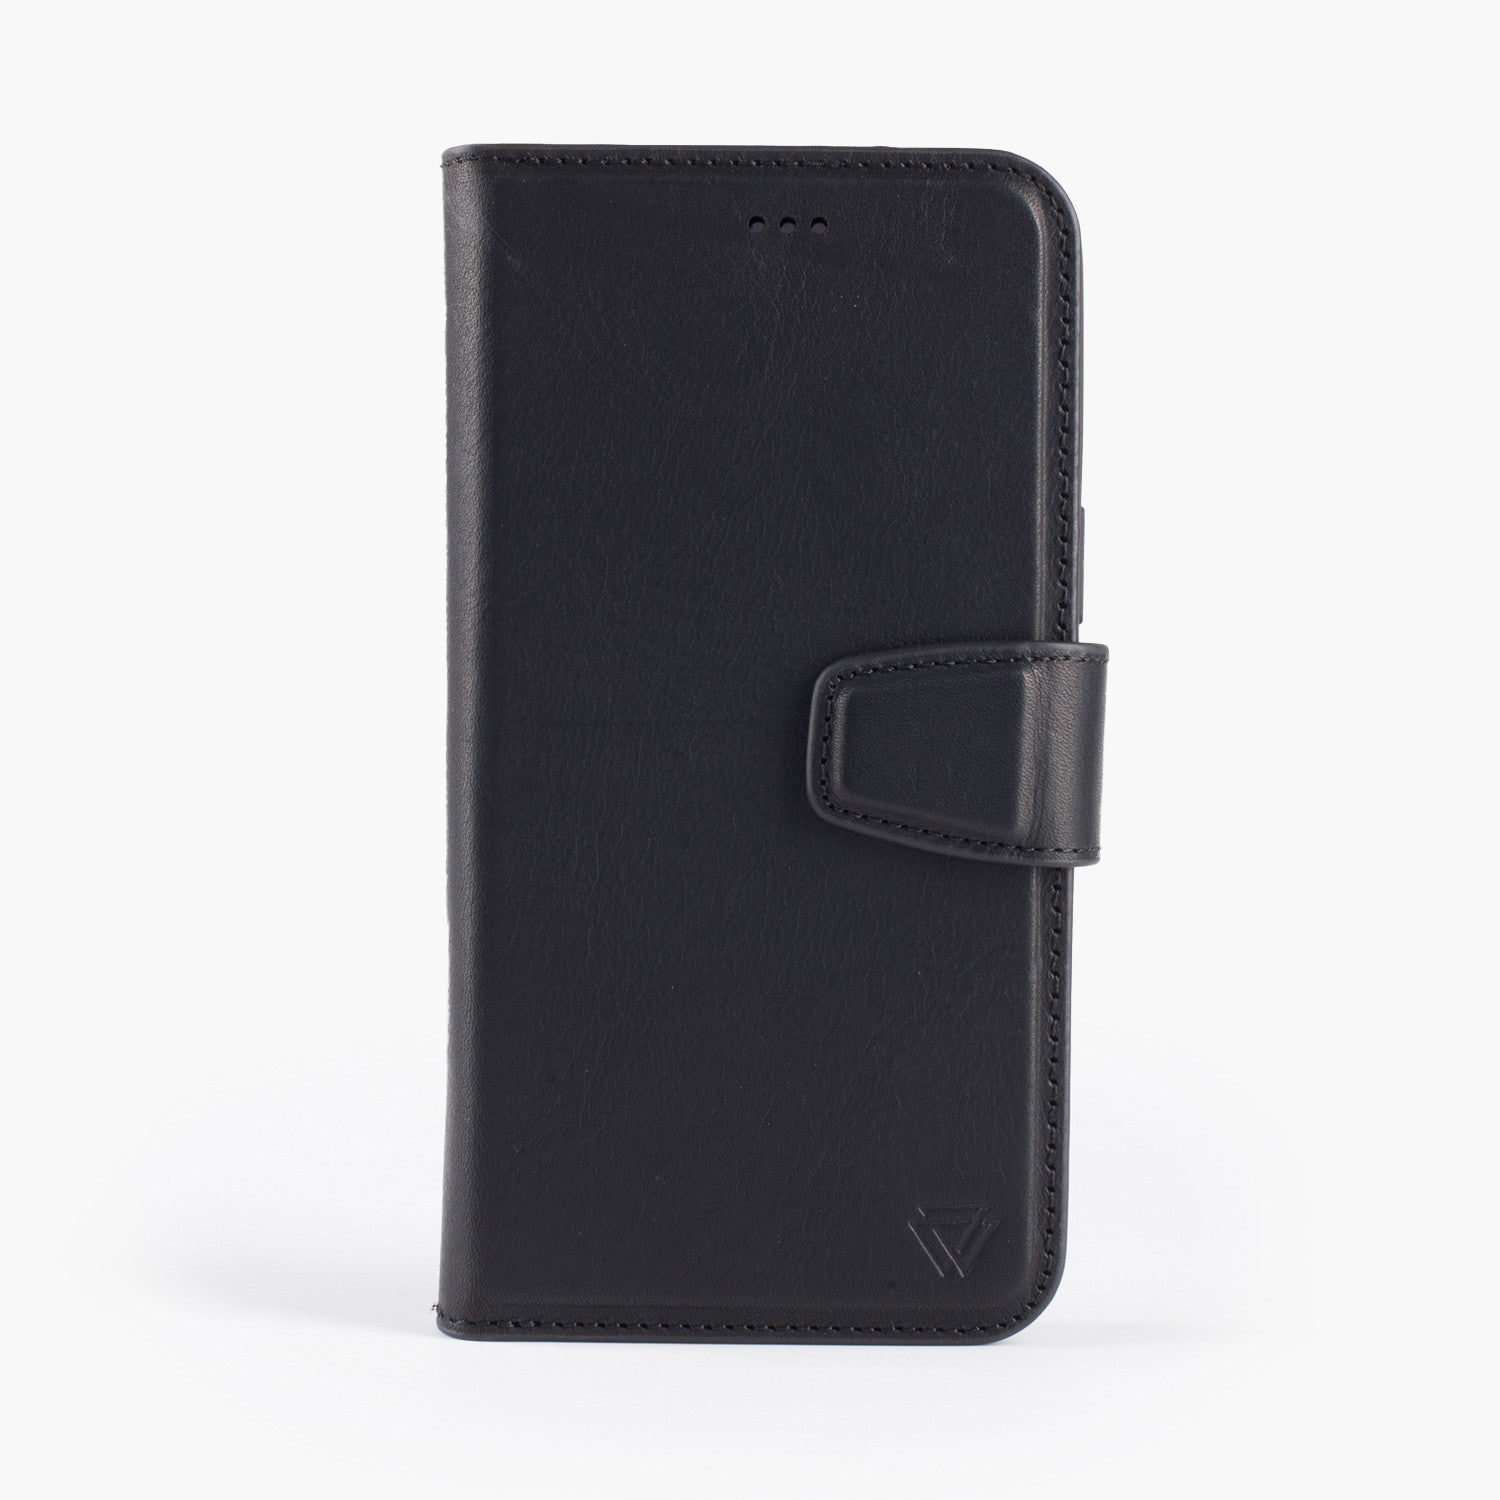 Wachikopa leather Magic Book Case 2 in 1 for iPhone 13 Pro Max Black